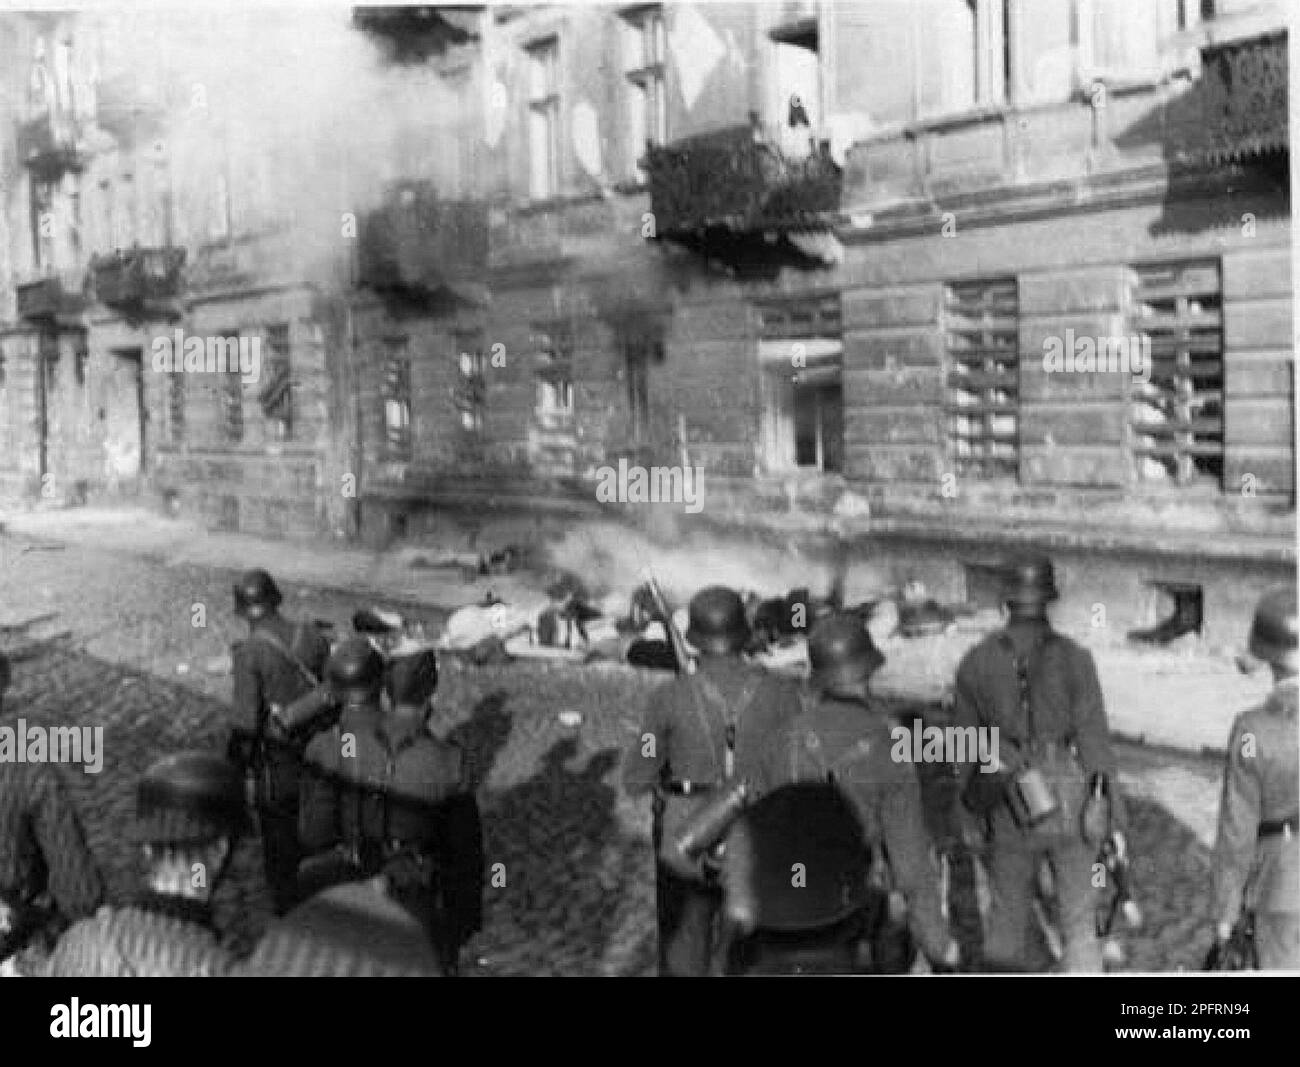 In January 1943 the nazis arrived to round up the Jews of the Warsaw Ghetto  The Jews, resolved to fight it out, took on the SS with homemade and primitive weapons. The defenders were executed or deported and the Ghetto area was systematically demolished. This event is known as The Ghetto Uprising. This image shows SS troops standing near the bodies of Jews who committed suicide by jumping from a fourth story window rather than be captured. This image is from the German photographic record of the event, known as the Stroop report. Stock Photo